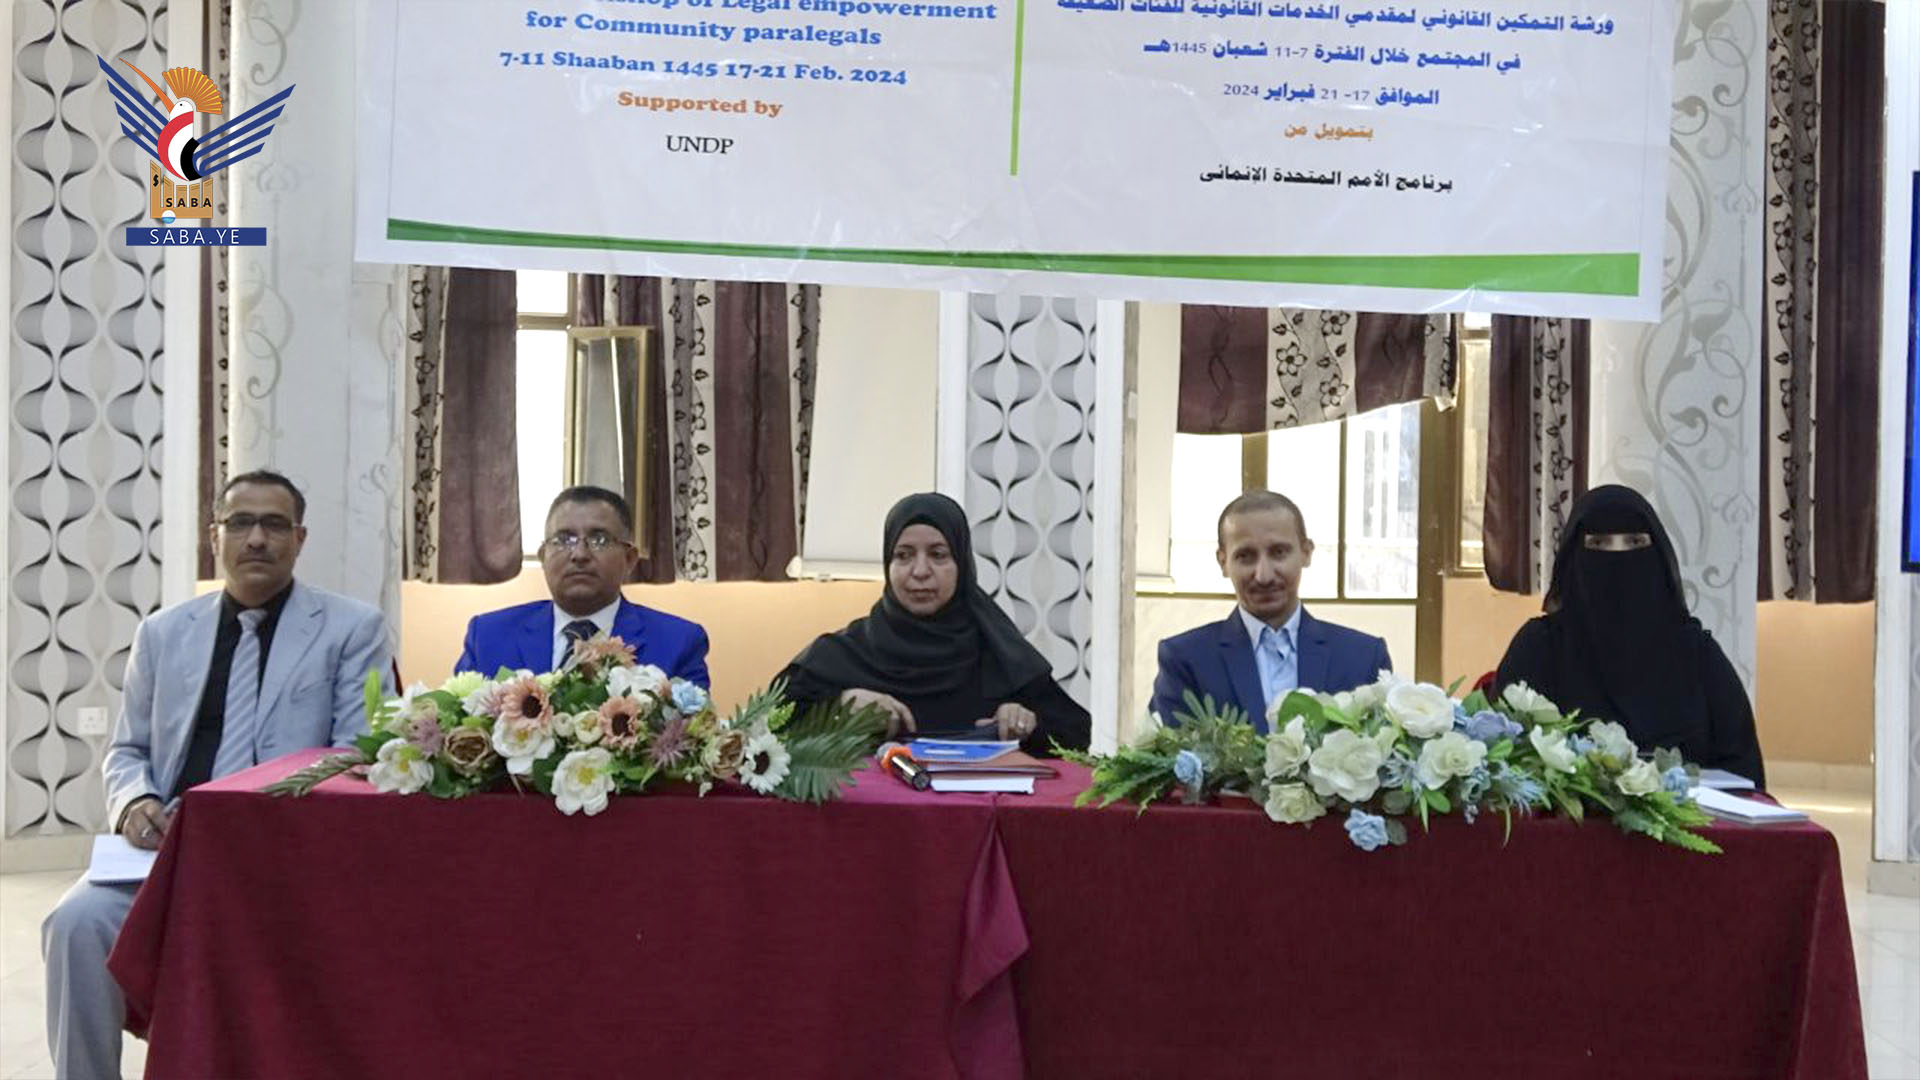 Workshop on service law for vulnerable groups in Sana’a